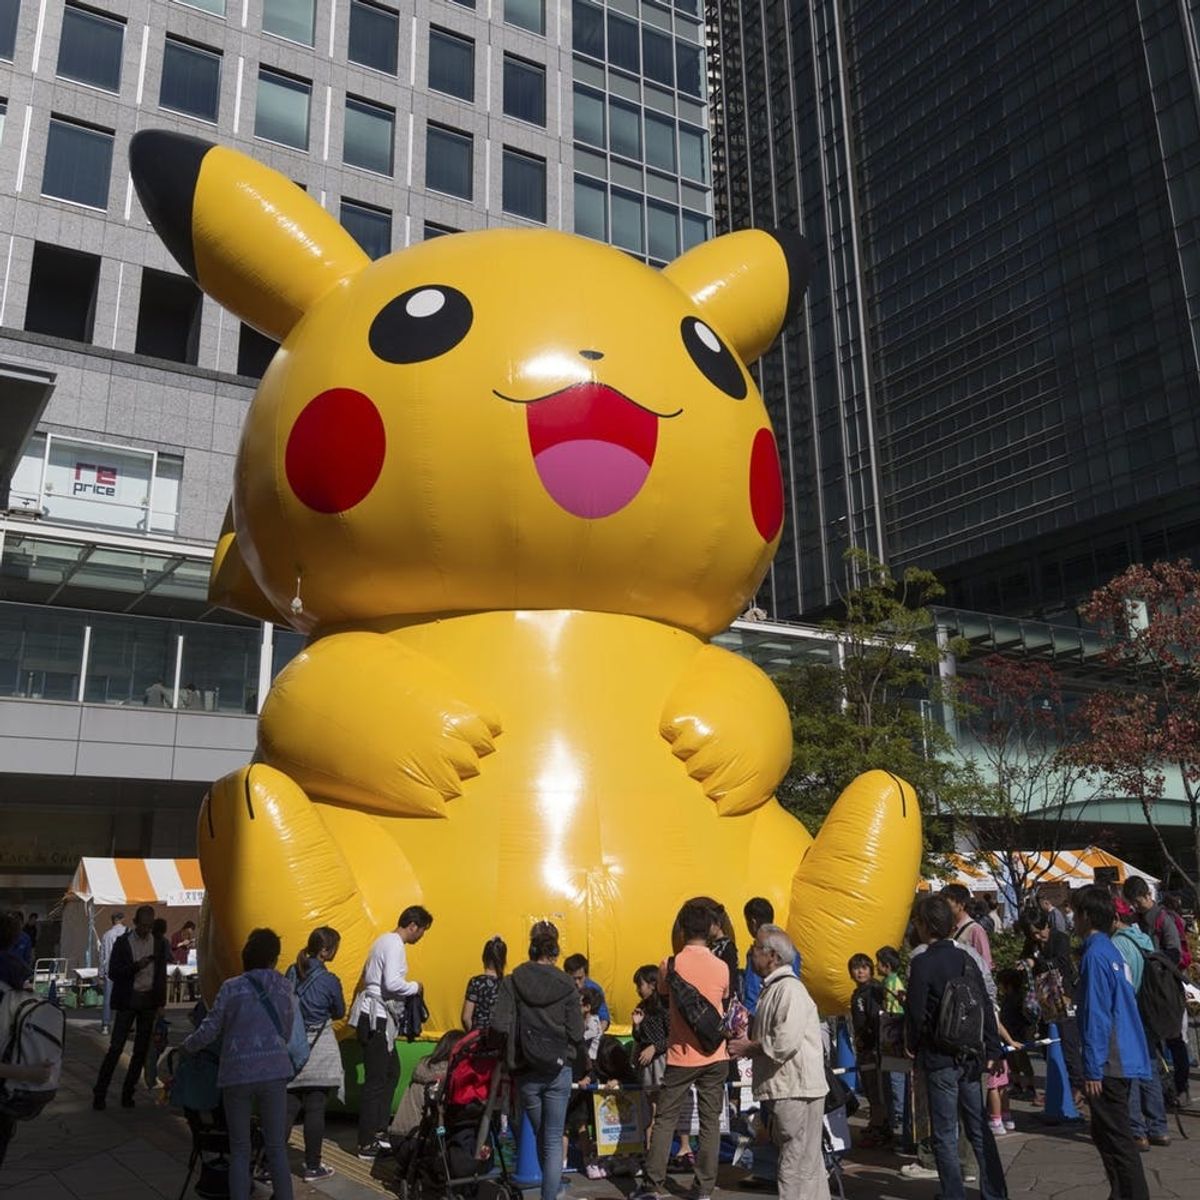 A New Pokemon App Is Taking Over + Everyone Is Freaking Out